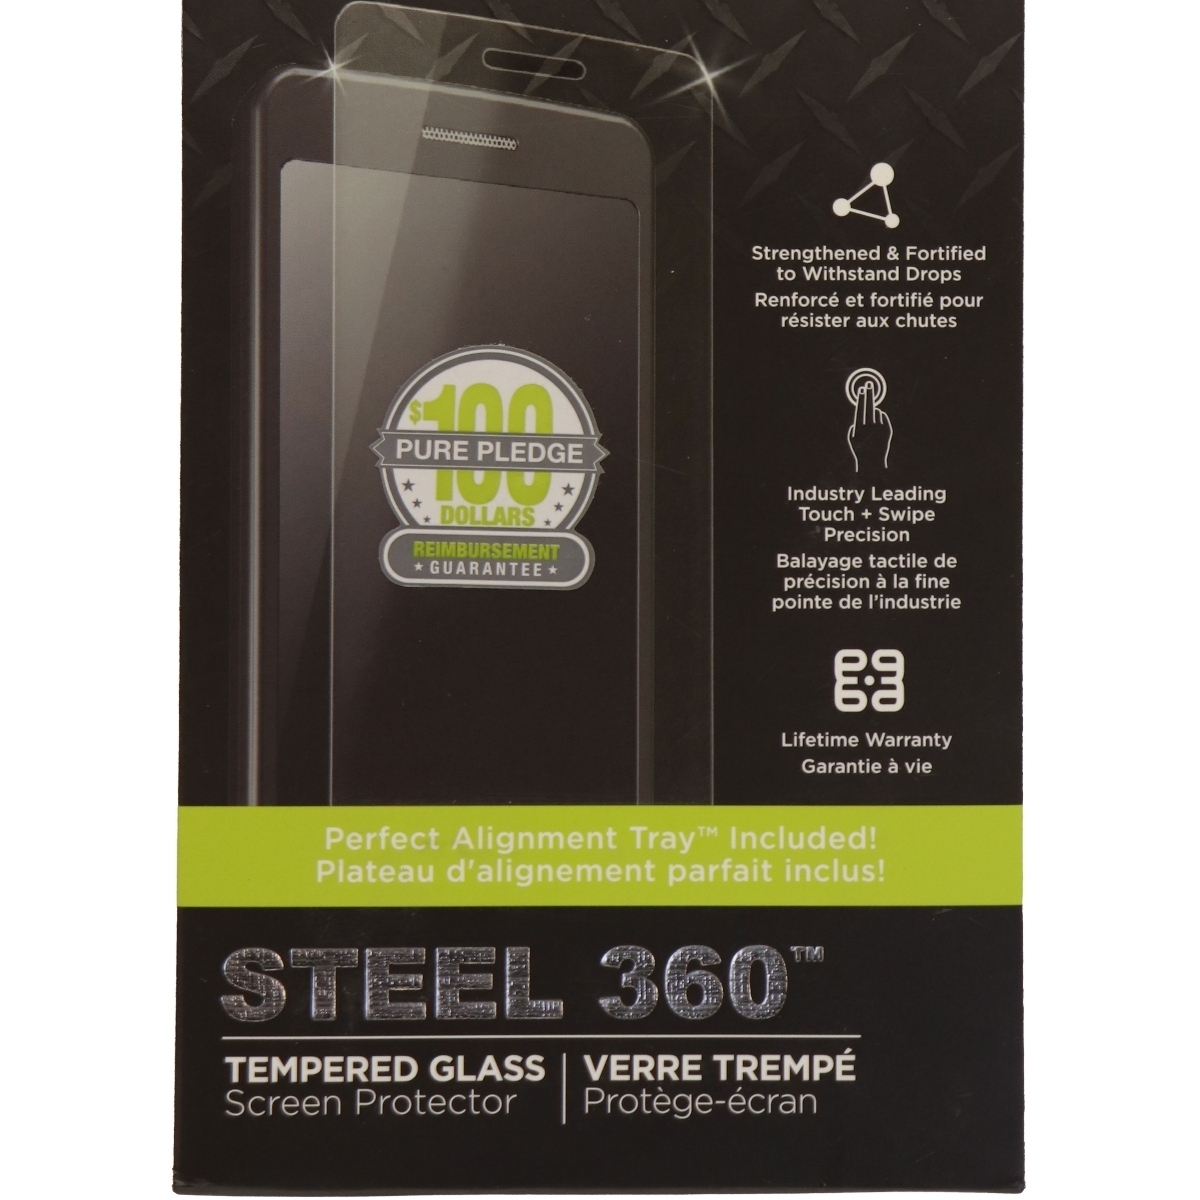 PureGear Steel 360 Tempered Glass Screen Protector For Moto Z Force Droid